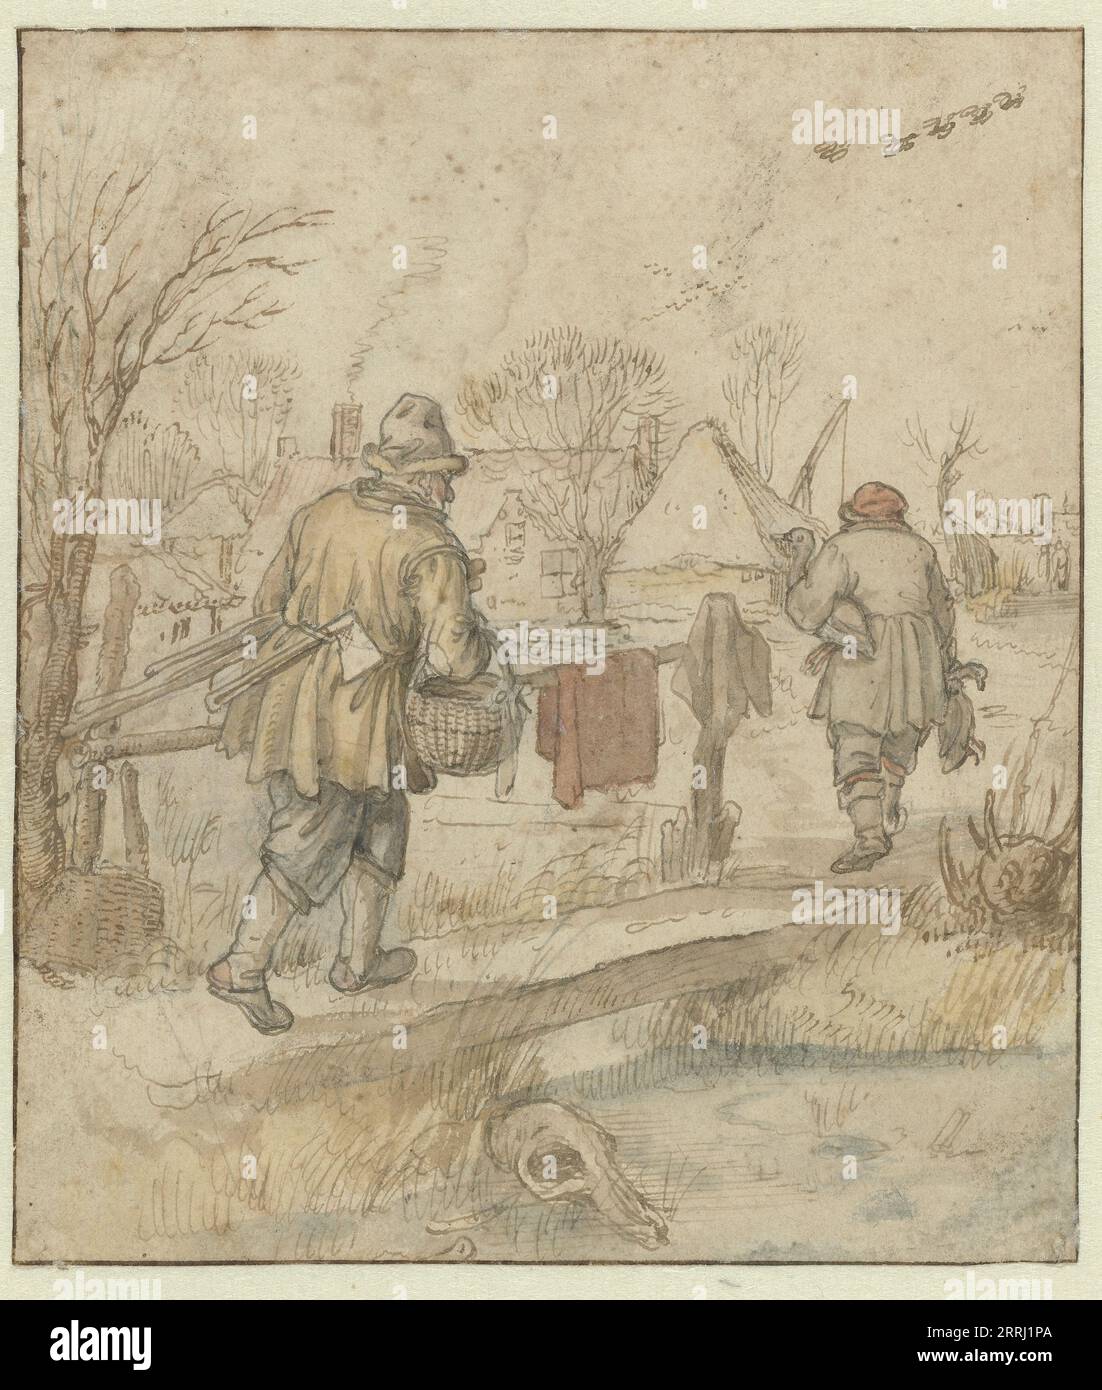 Return of the Duck Hunters / verso: Sketches of Ships and of a Man in Winter Clothing, c.1610-c.1615. Stock Photo